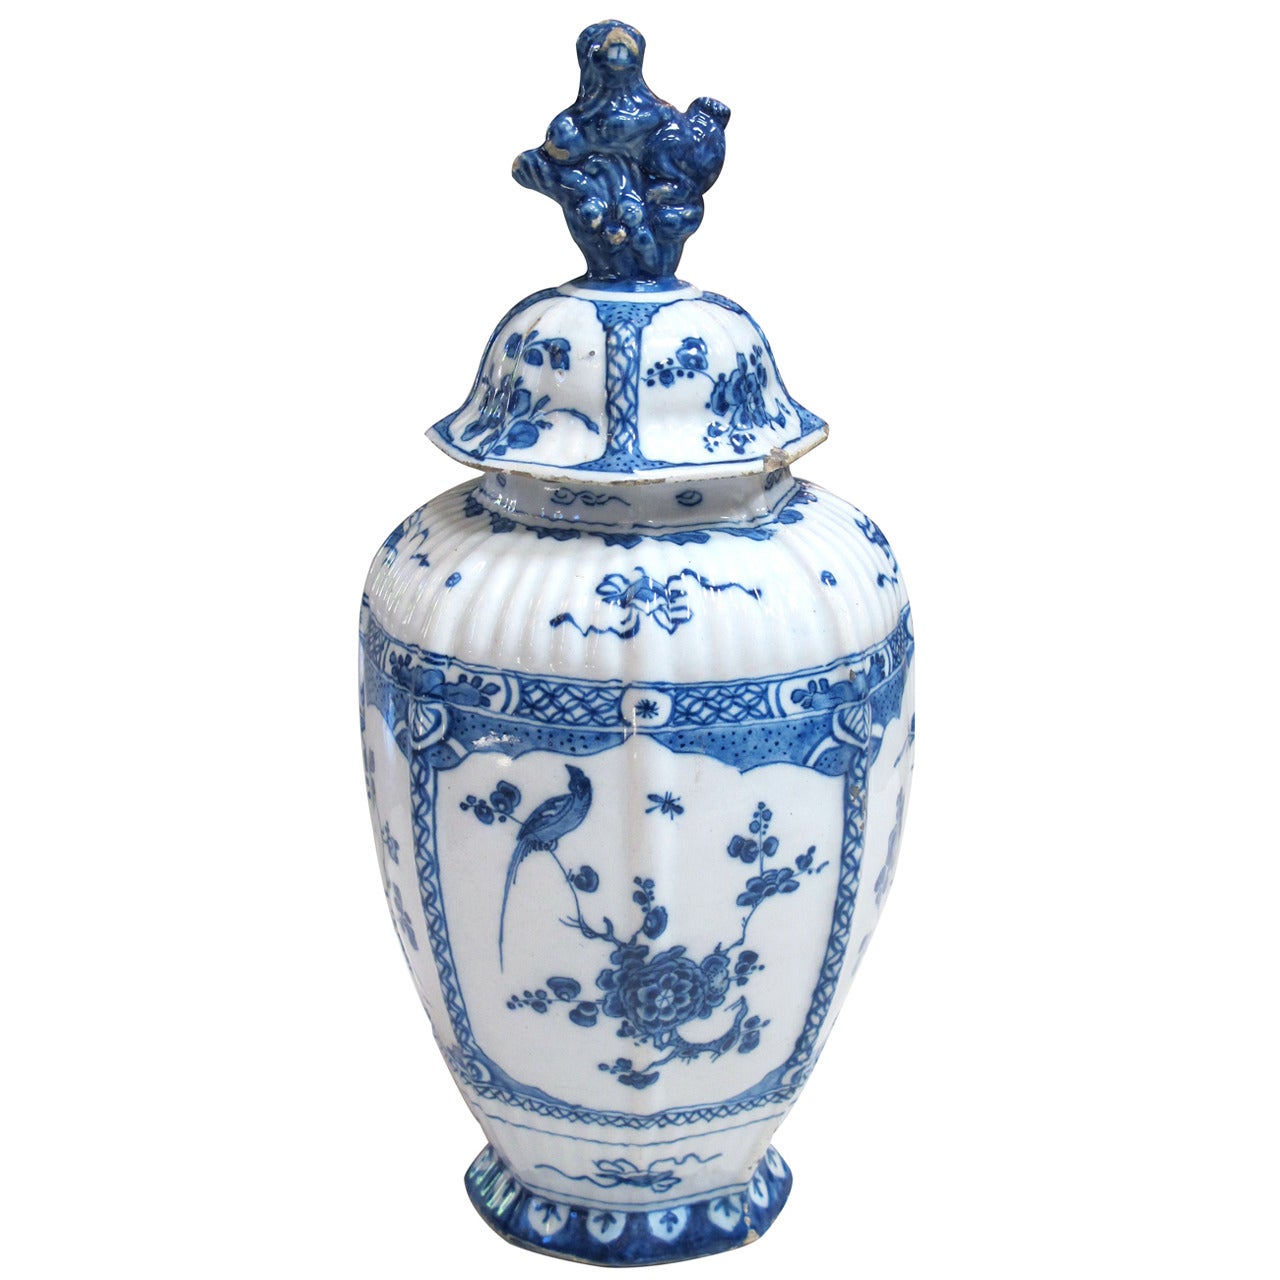 Good 18th Century Dutch Delft Blue & White Ribbed Covered Vase with Lion Finial